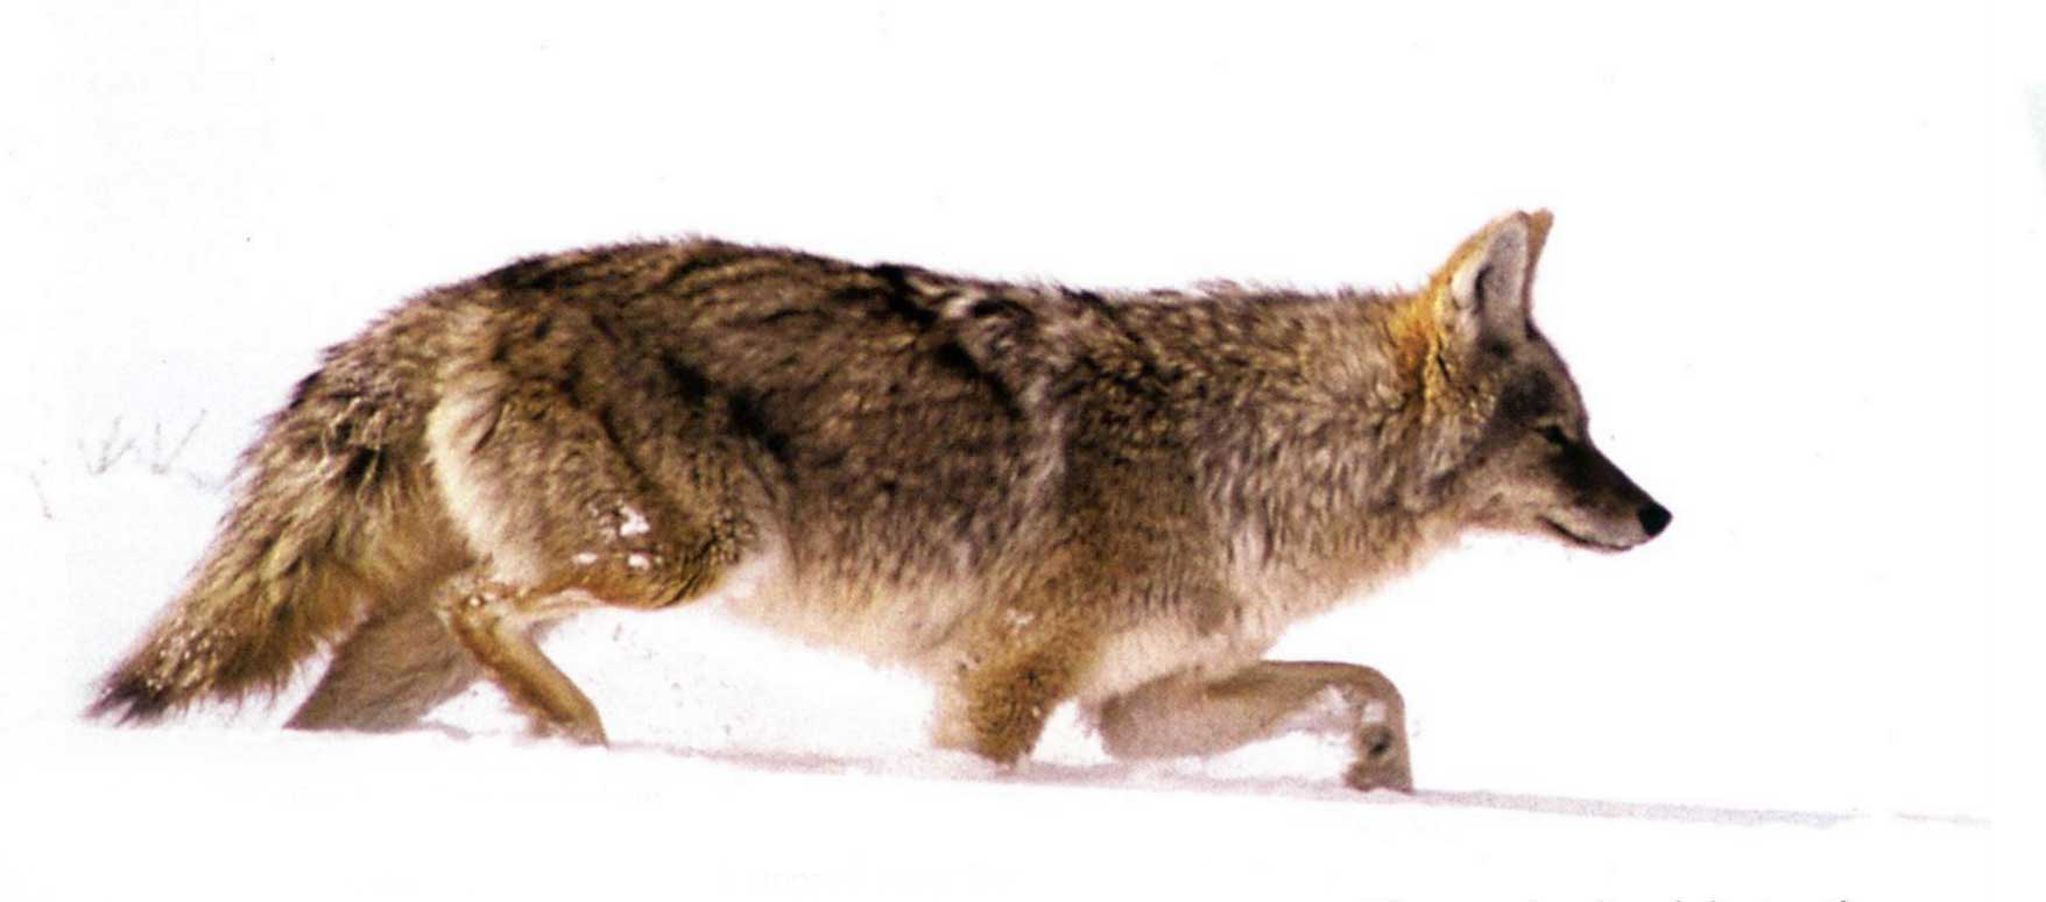 A winter coyote sneaking in to a hunter's call.